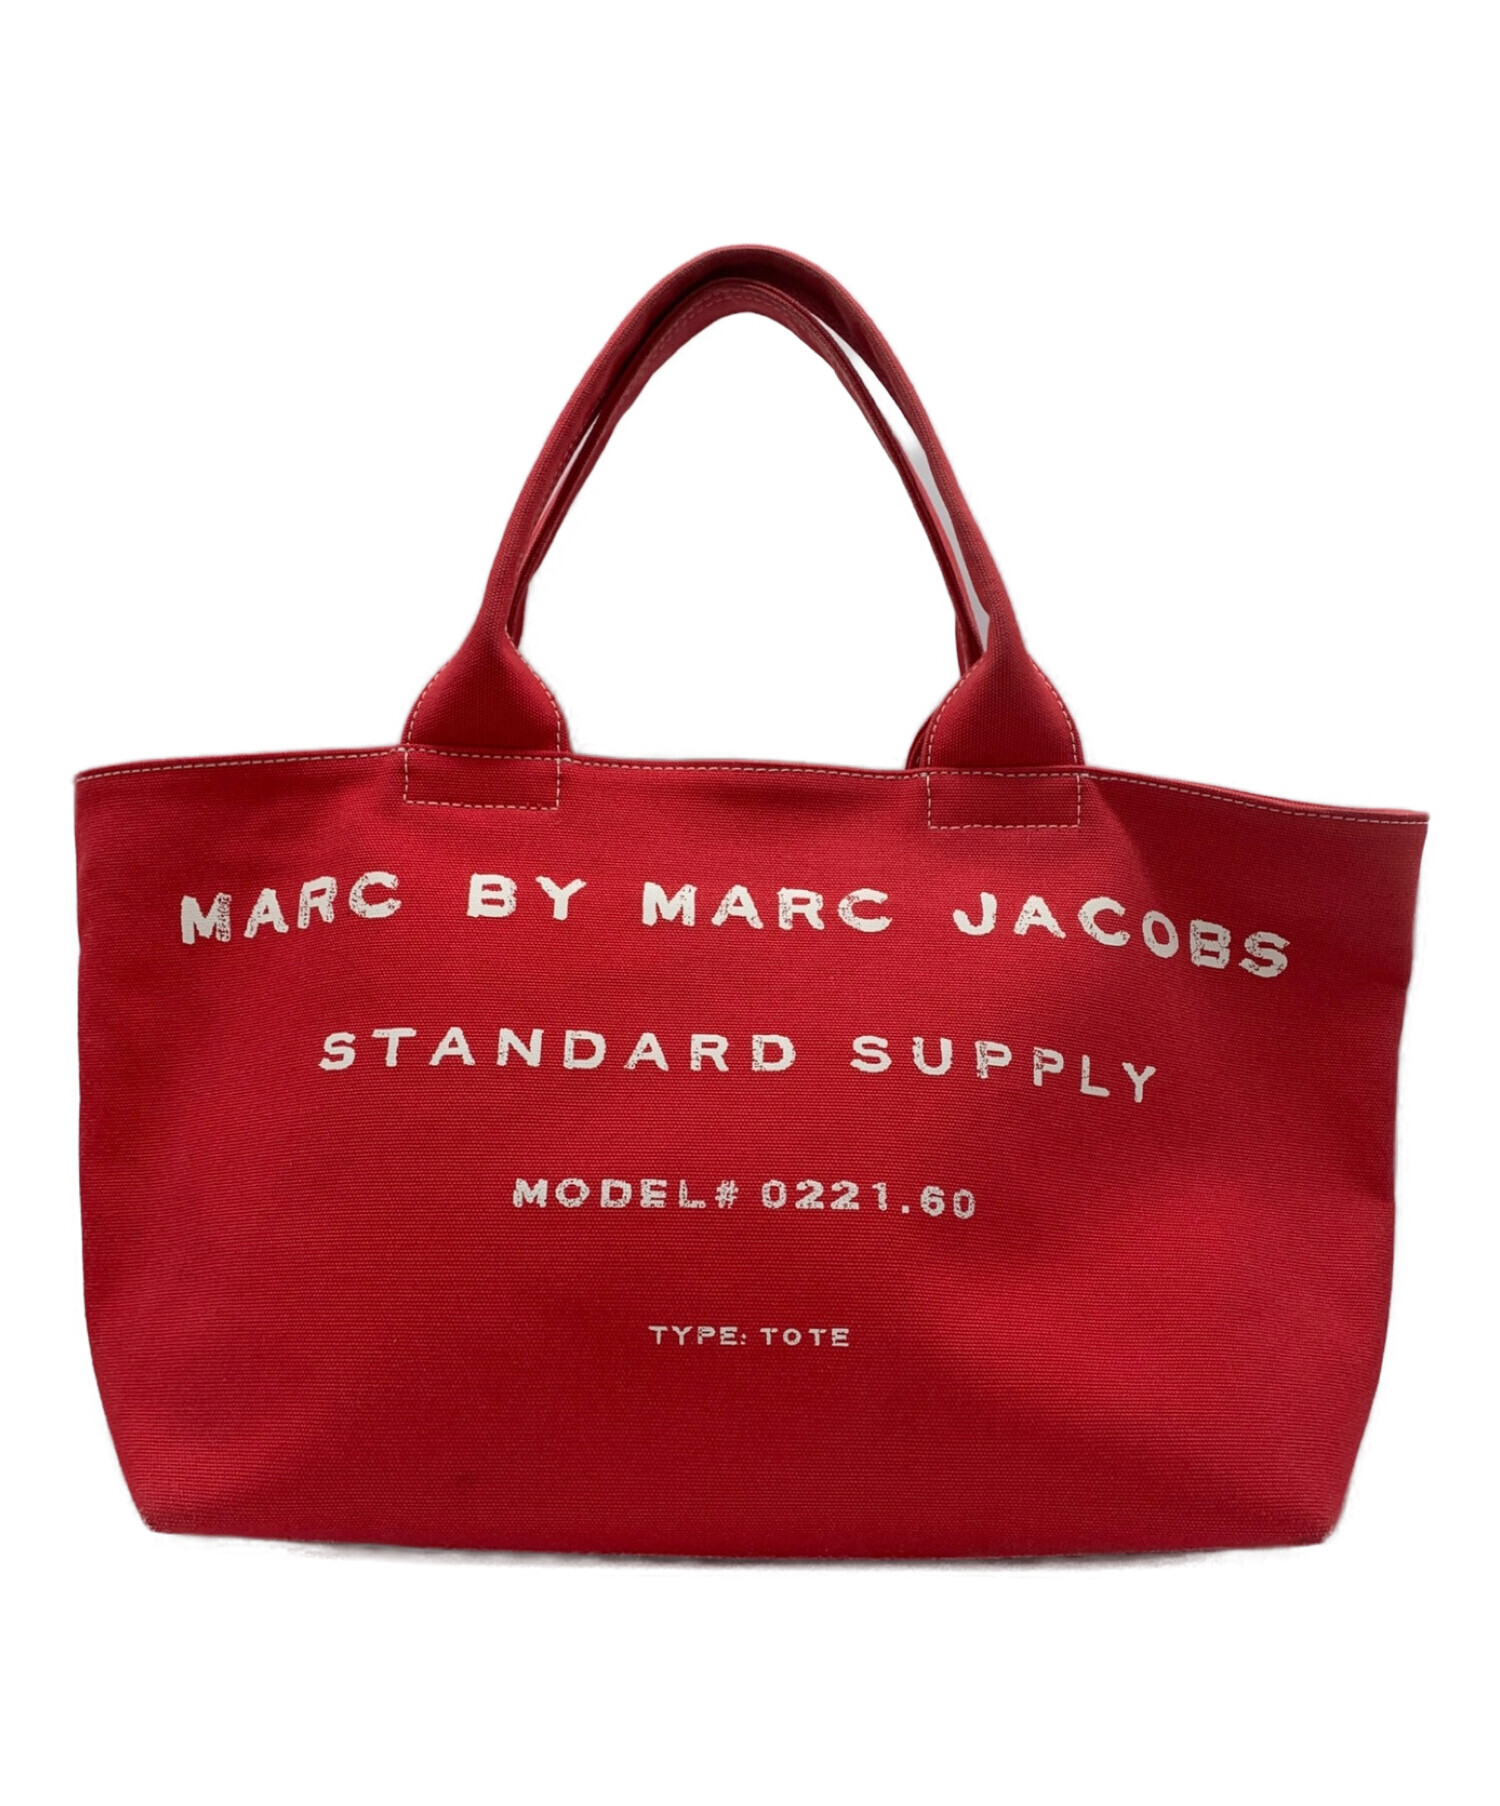 Marc by Marc Jacobs (マークバイマークジェイコブス) トートバッグ レッド